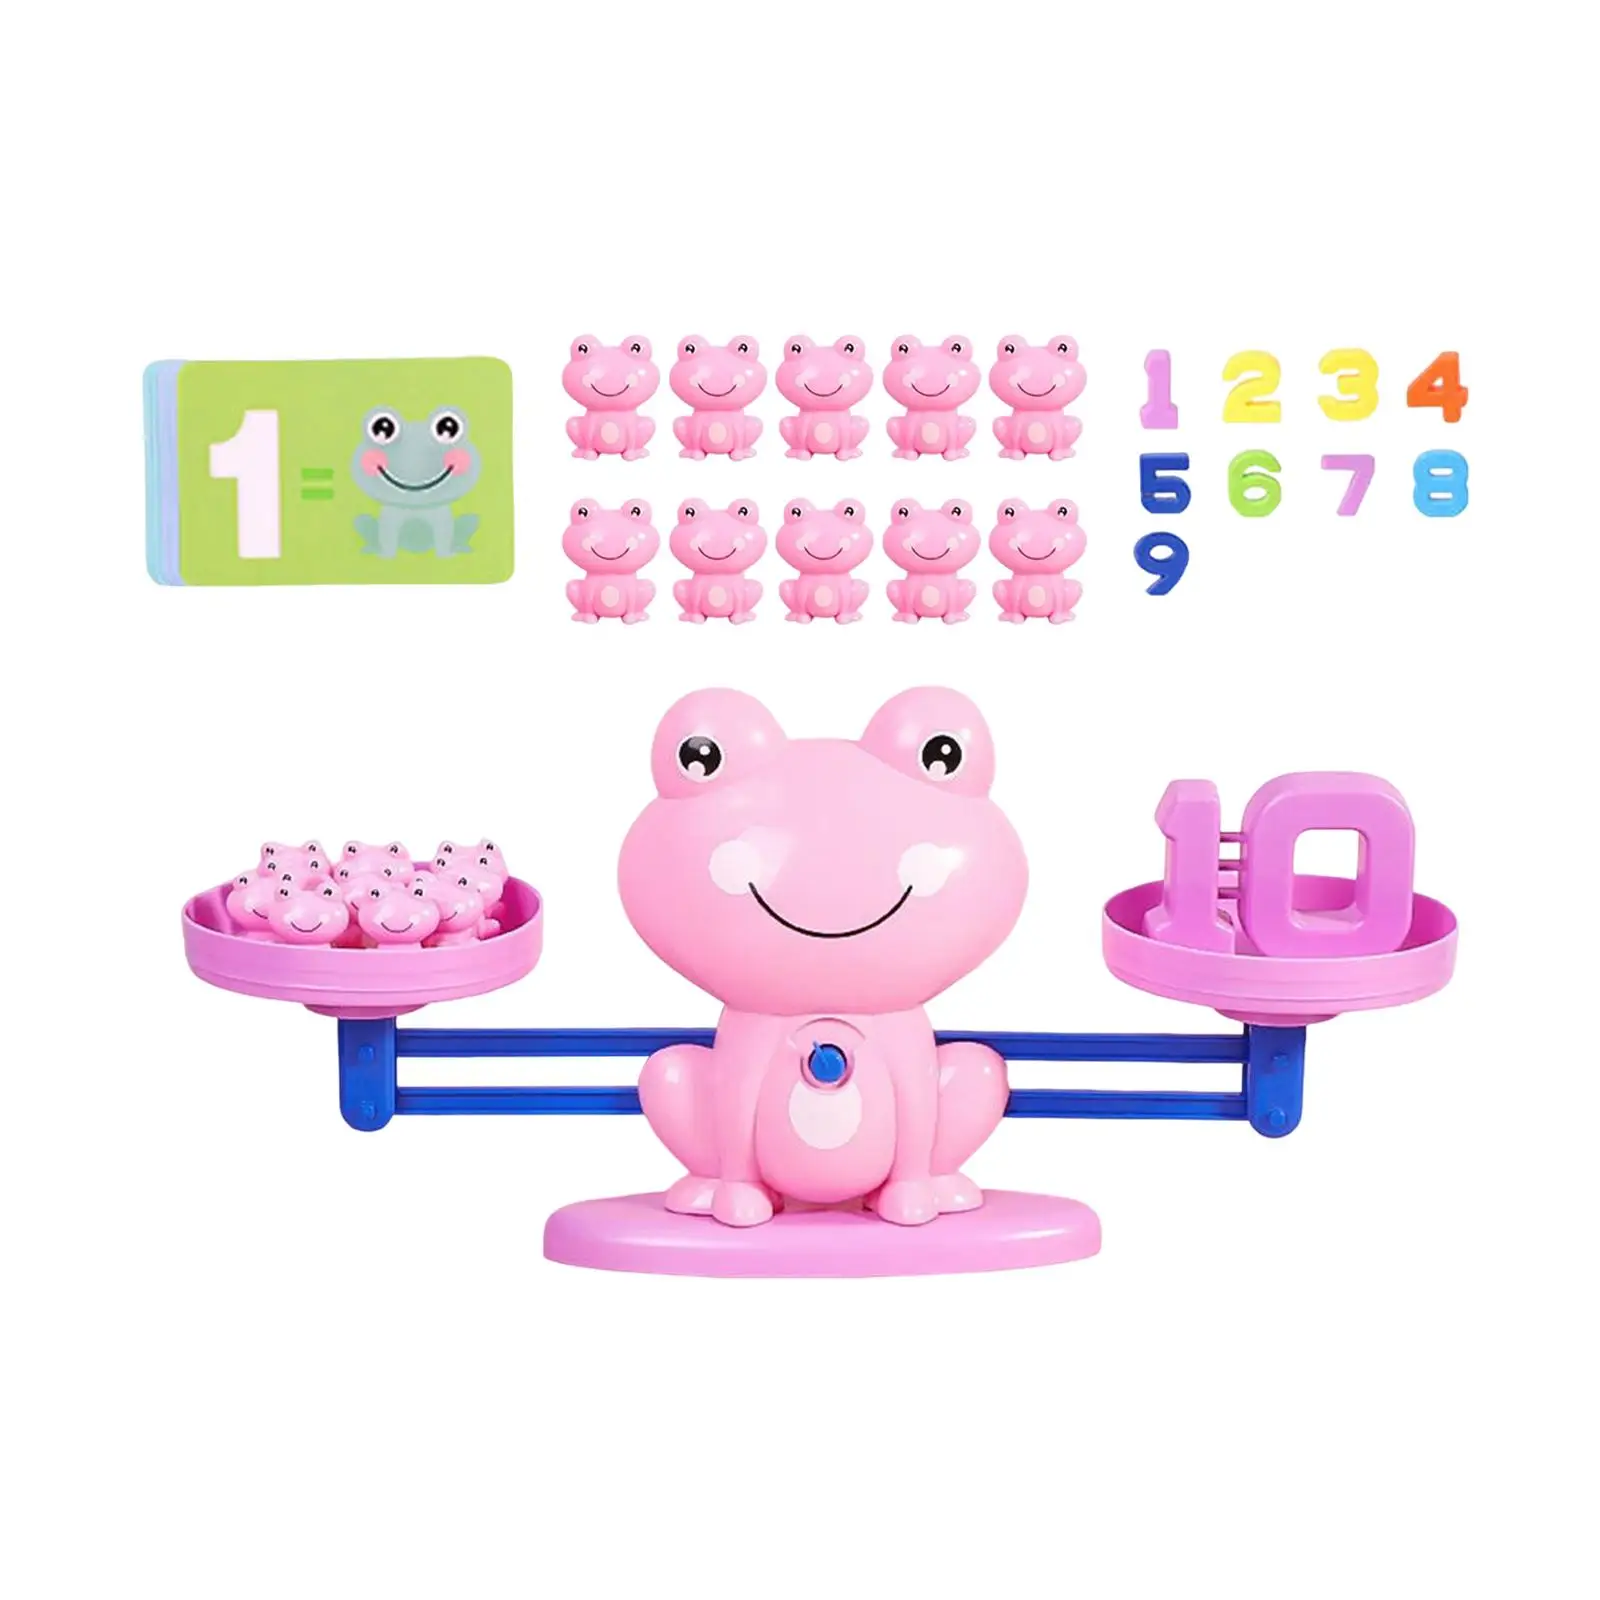 Balance Math Game Number Counting Toy Learning Activities for Children Gifts